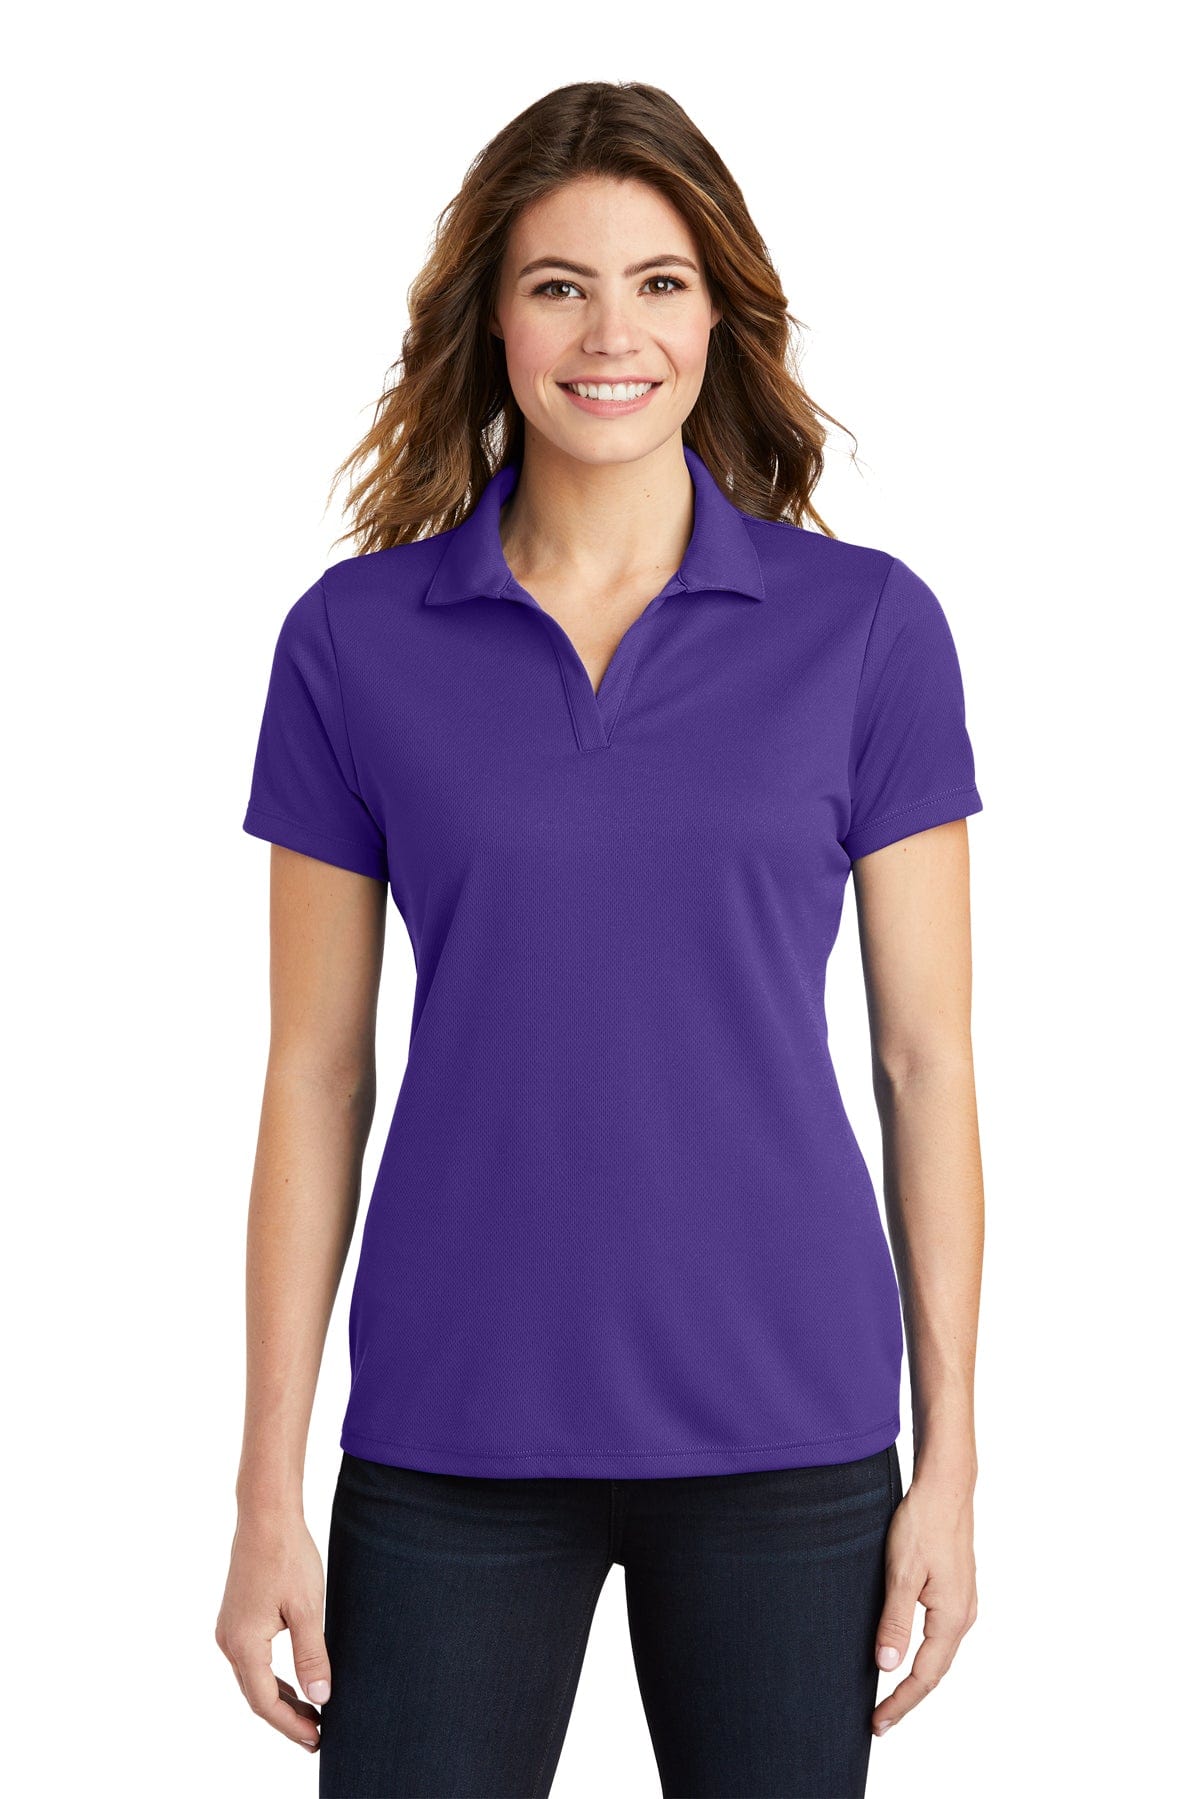 Equestrian Team Apparel Purple / XS Maplewood Warmbloods- Men's Polos equestrian team apparel online tack store mobile tack store custom farm apparel custom show stable clothing equestrian lifestyle horse show clothing riding clothes horses equestrian tack store